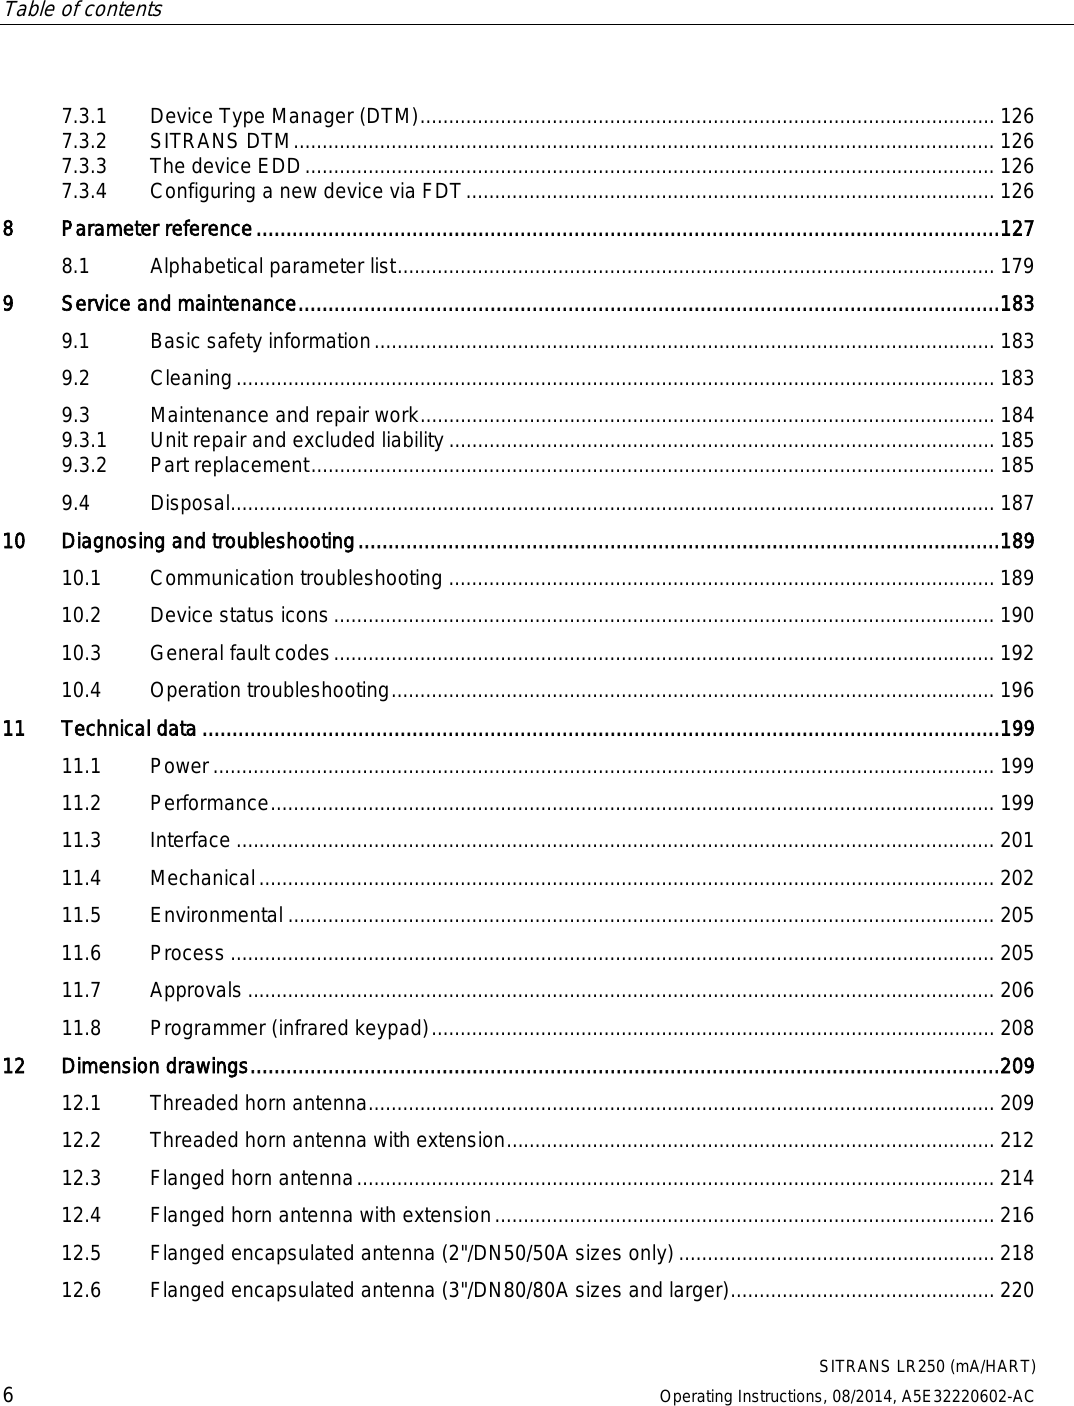 Table of contents      SITRANS LR250 (mA/HART) 6 Operating Instructions, 08/2014, A5E32220602-AC 7.3.1 Device Type Manager (DTM) .................................................................................................... 126 7.3.2 SITRANS DTM .......................................................................................................................... 126 7.3.3 The device EDD ........................................................................................................................ 126 7.3.4 Configuring a new device via FDT ............................................................................................ 126 8  Parameter reference ............................................................................................................................ 127 8.1 Alphabetical parameter list ........................................................................................................ 179 9  Service and maintenance ..................................................................................................................... 183 9.1 Basic safety information ............................................................................................................ 183 9.2 Cleaning .................................................................................................................................... 183 9.3 Maintenance and repair work .................................................................................................... 184 9.3.1 Unit repair and excluded liability ............................................................................................... 185 9.3.2 Part replacement ....................................................................................................................... 185 9.4 Disposal..................................................................................................................................... 187 10 Diagnosing and troubleshooting ........................................................................................................... 189 10.1 Communication troubleshooting ............................................................................................... 189 10.2 Device status icons ................................................................................................................... 190 10.3 General fault codes ................................................................................................................... 192 10.4 Operation troubleshooting ......................................................................................................... 196 11 Technical data ..................................................................................................................................... 199 11.1 Power ........................................................................................................................................ 199 11.2 Performance .............................................................................................................................. 199 11.3 Interface .................................................................................................................................... 201 11.4 Mechanical ................................................................................................................................ 202 11.5 Environmental ........................................................................................................................... 205 11.6 Process ..................................................................................................................................... 205 11.7 Approvals .................................................................................................................................. 206 11.8 Programmer (infrared keypad) .................................................................................................. 208 12 Dimension drawings ............................................................................................................................. 209 12.1 Threaded horn antenna ............................................................................................................. 209 12.2 Threaded horn antenna with extension ..................................................................................... 212 12.3 Flanged horn antenna ............................................................................................................... 214 12.4 Flanged horn antenna with extension ....................................................................................... 216 12.5 Flanged encapsulated antenna (2&quot;/DN50/50A sizes only) ....................................................... 218 12.6 Flanged encapsulated antenna (3&quot;/DN80/80A sizes and larger) .............................................. 220 